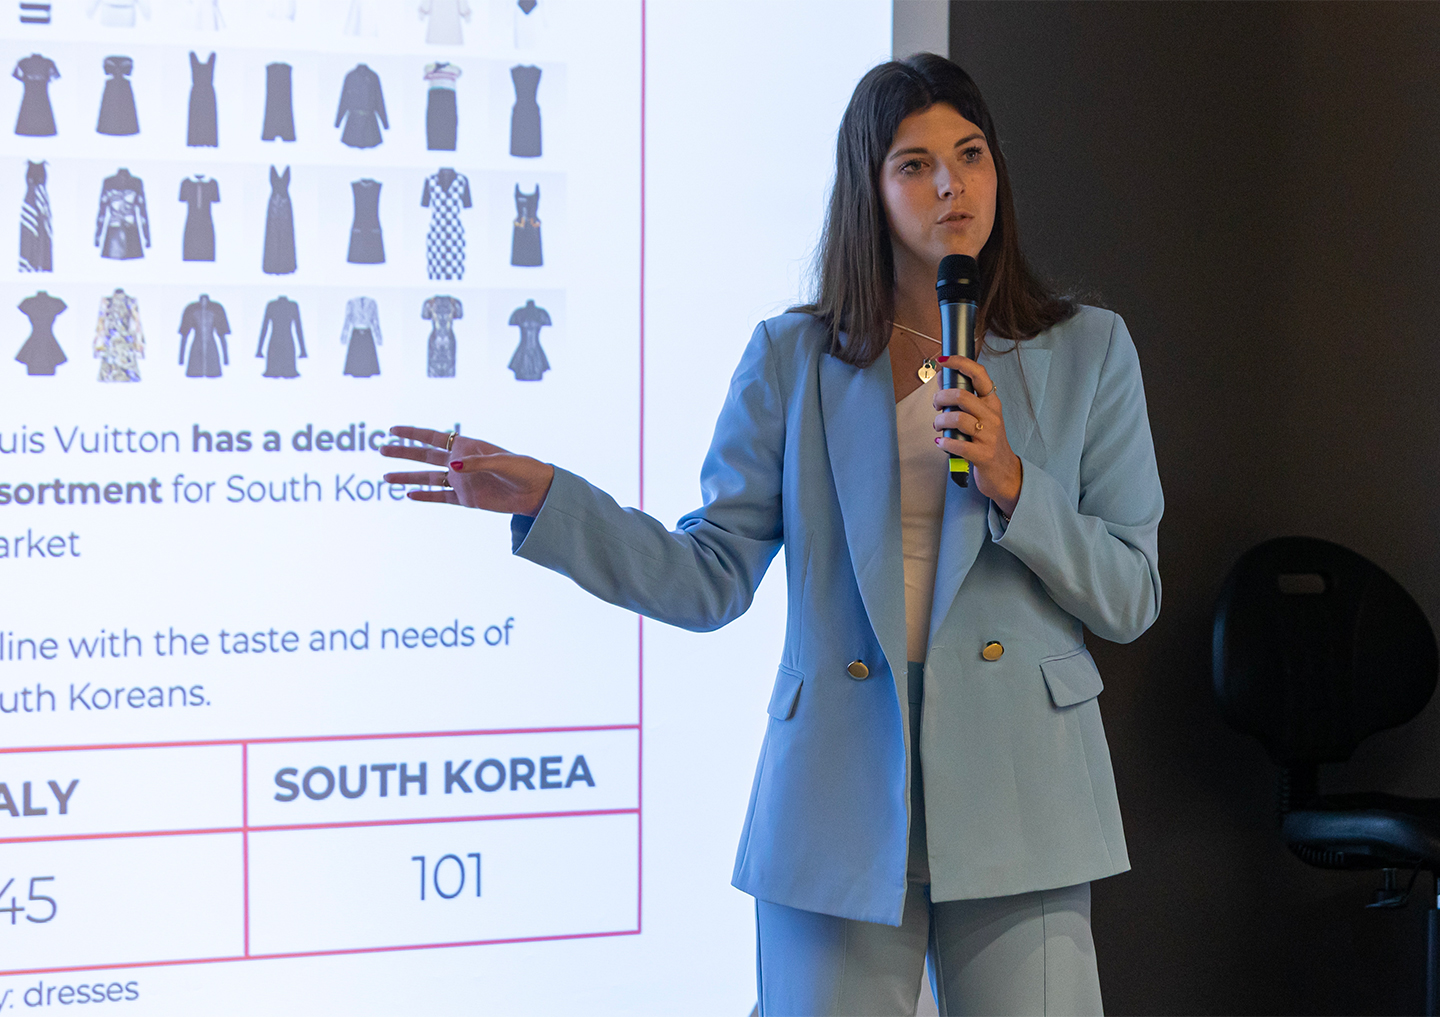 An Istituto Marangoni Fashion & Luxury Brand Management Master’s student discussing her project on the South Korean luxury market as part of the mentorship project held by Valentino’s Chief Brand Officer Alessio Vanetti